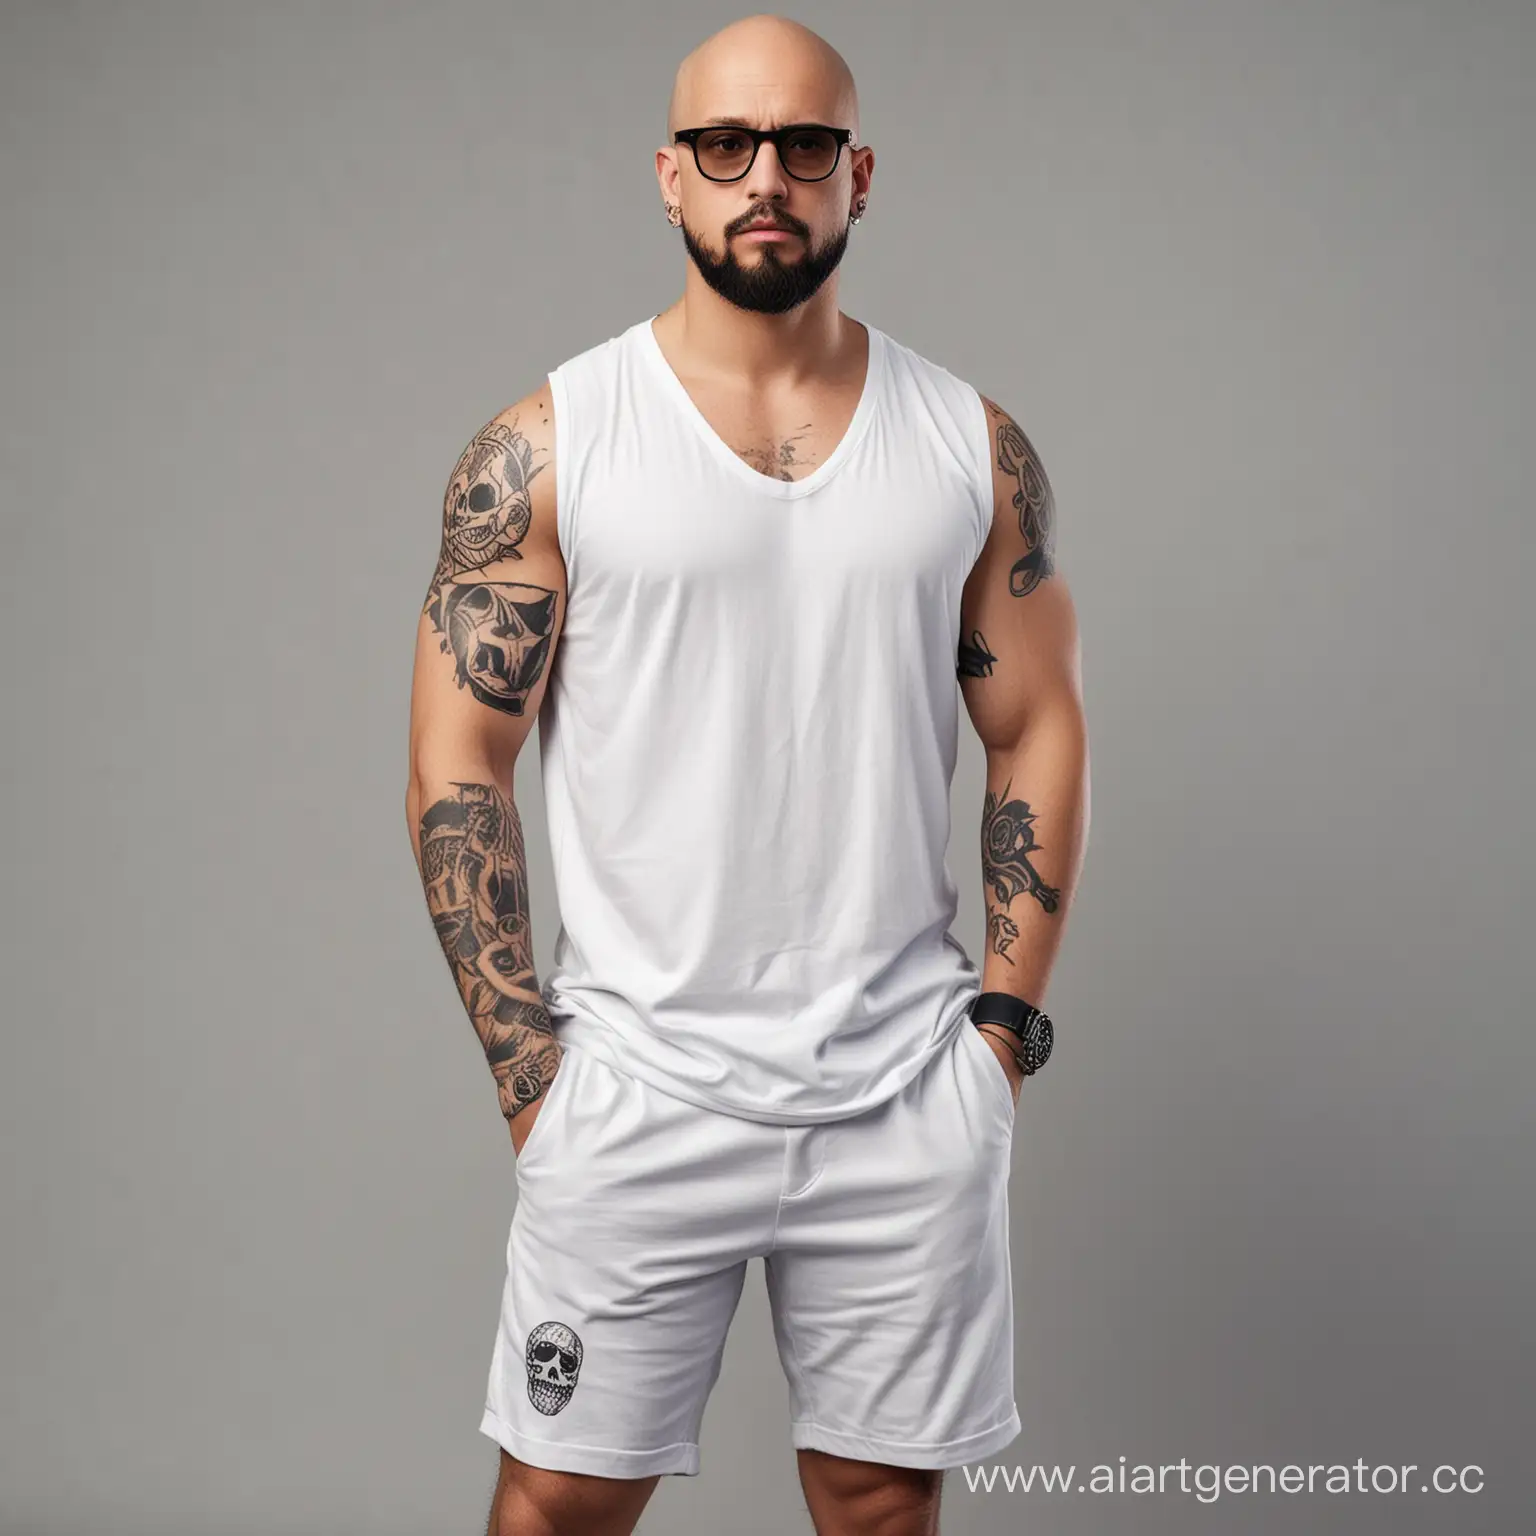 Bald-Man-with-Skull-Tattoo-and-Sneakers-in-White-Shirt